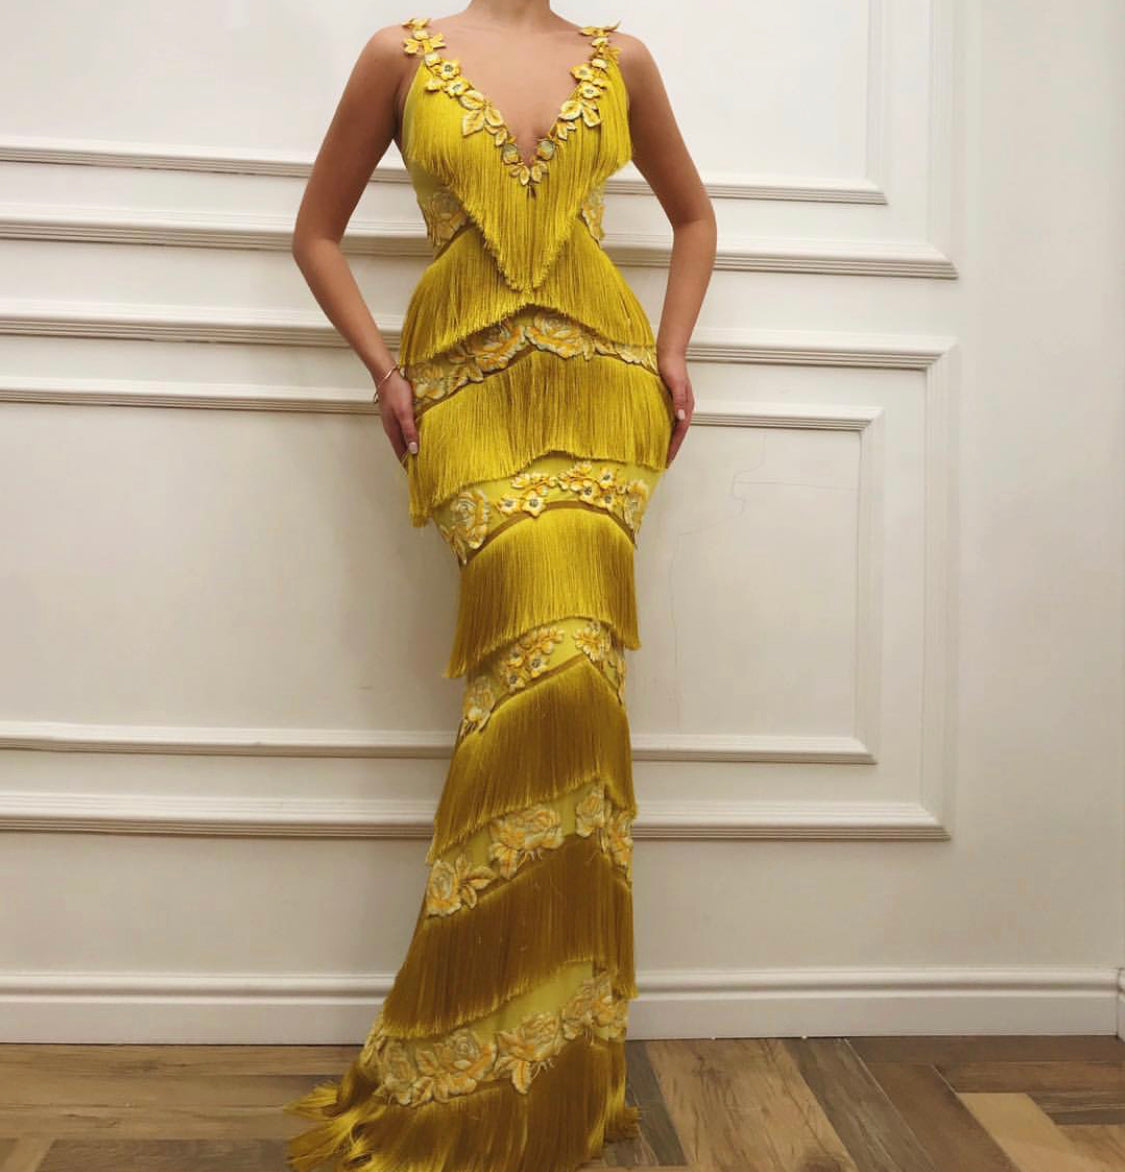 Yellow fringe mermaid dress with straps, v-neck and embroidery